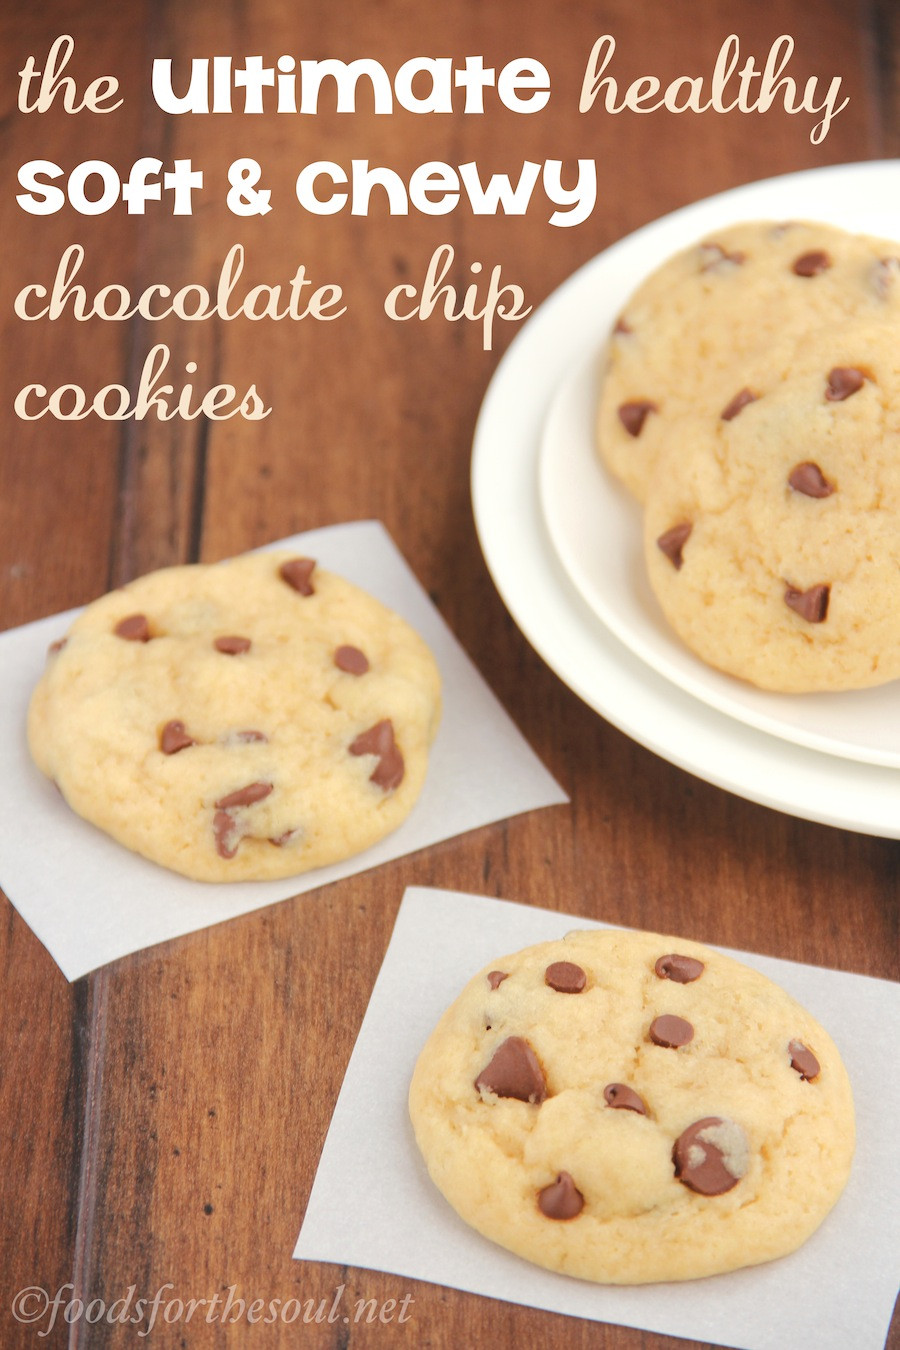 Low Calorie Chocolate Chip Cookie Recipes
 The Ultimate Healthy Soft & Chewy Chocolate Chip Cookies